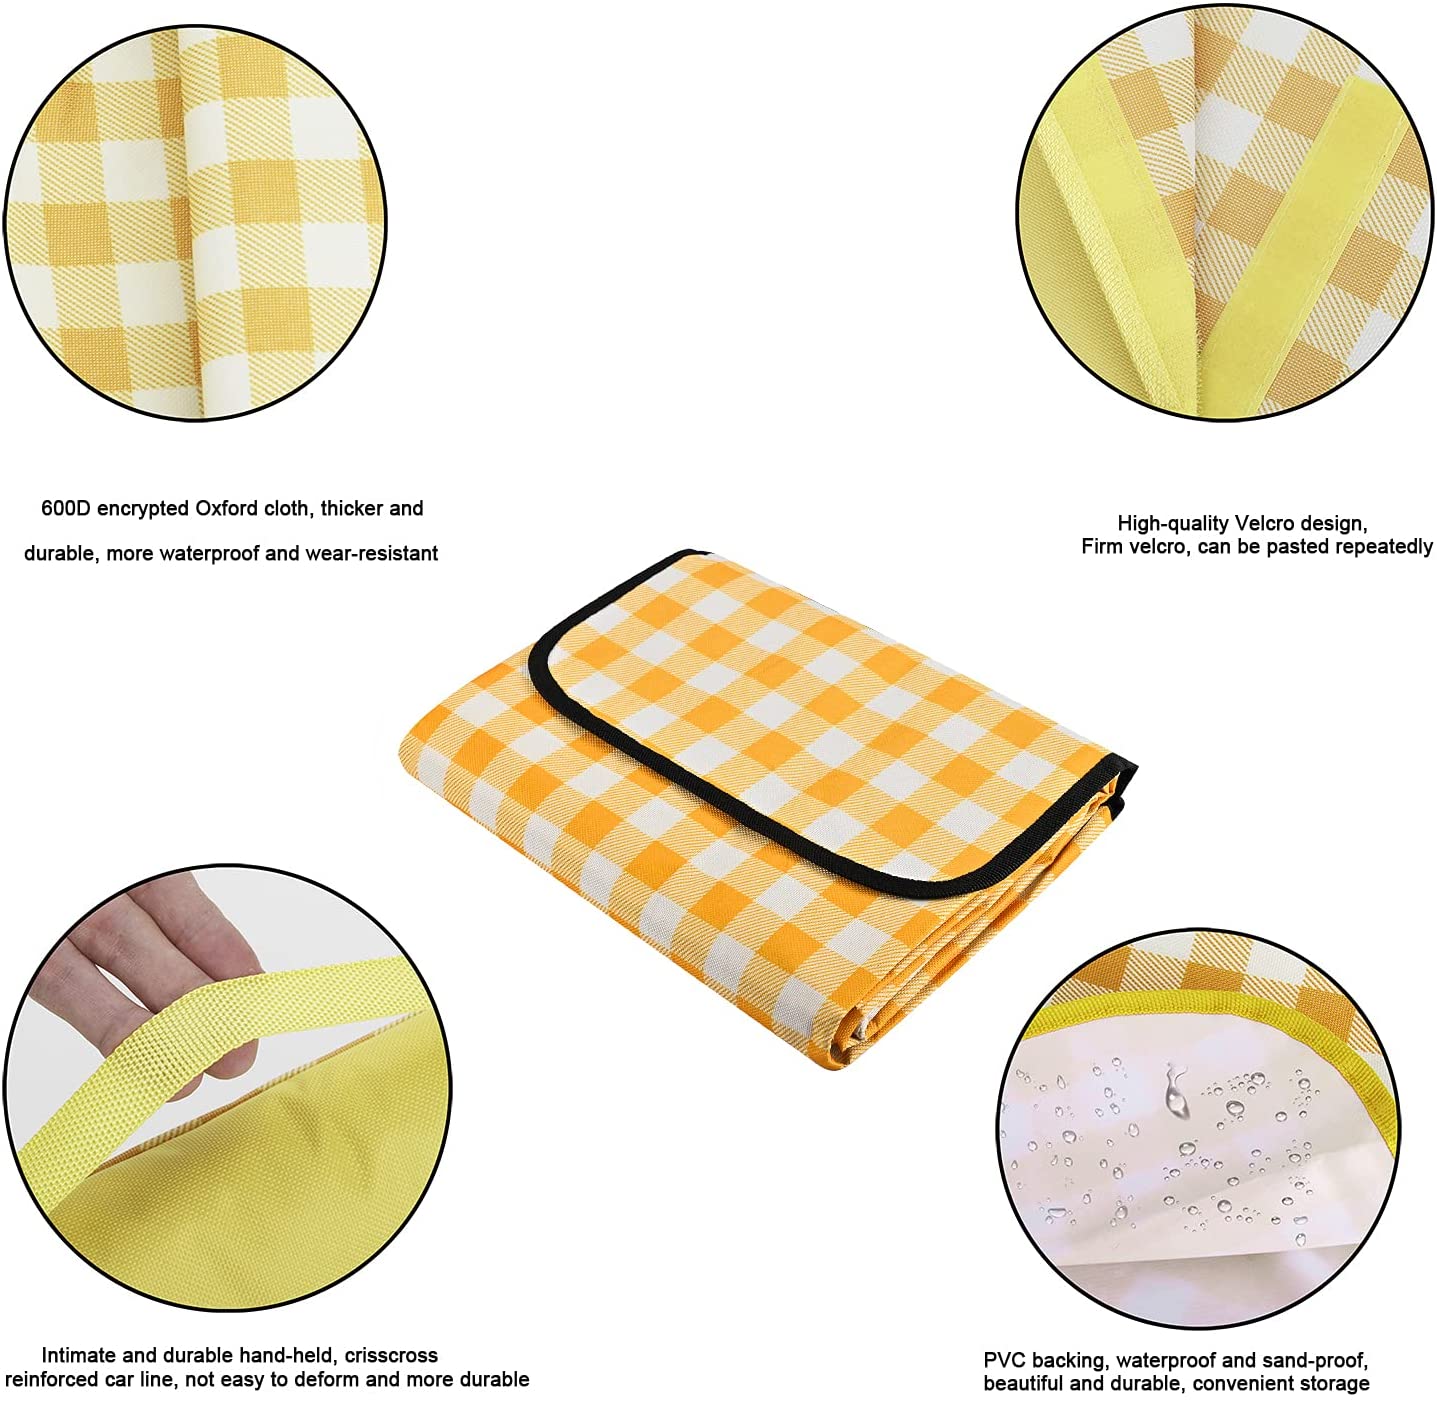 Outdoor Picnic Blanket, Foldable Outdoor Beach Blanket, Waterproof, Sandproof, Anti-Slip With Handle, Suitable For Home, Beach, Park, Hiking, Camping (150*200cm) Wintory